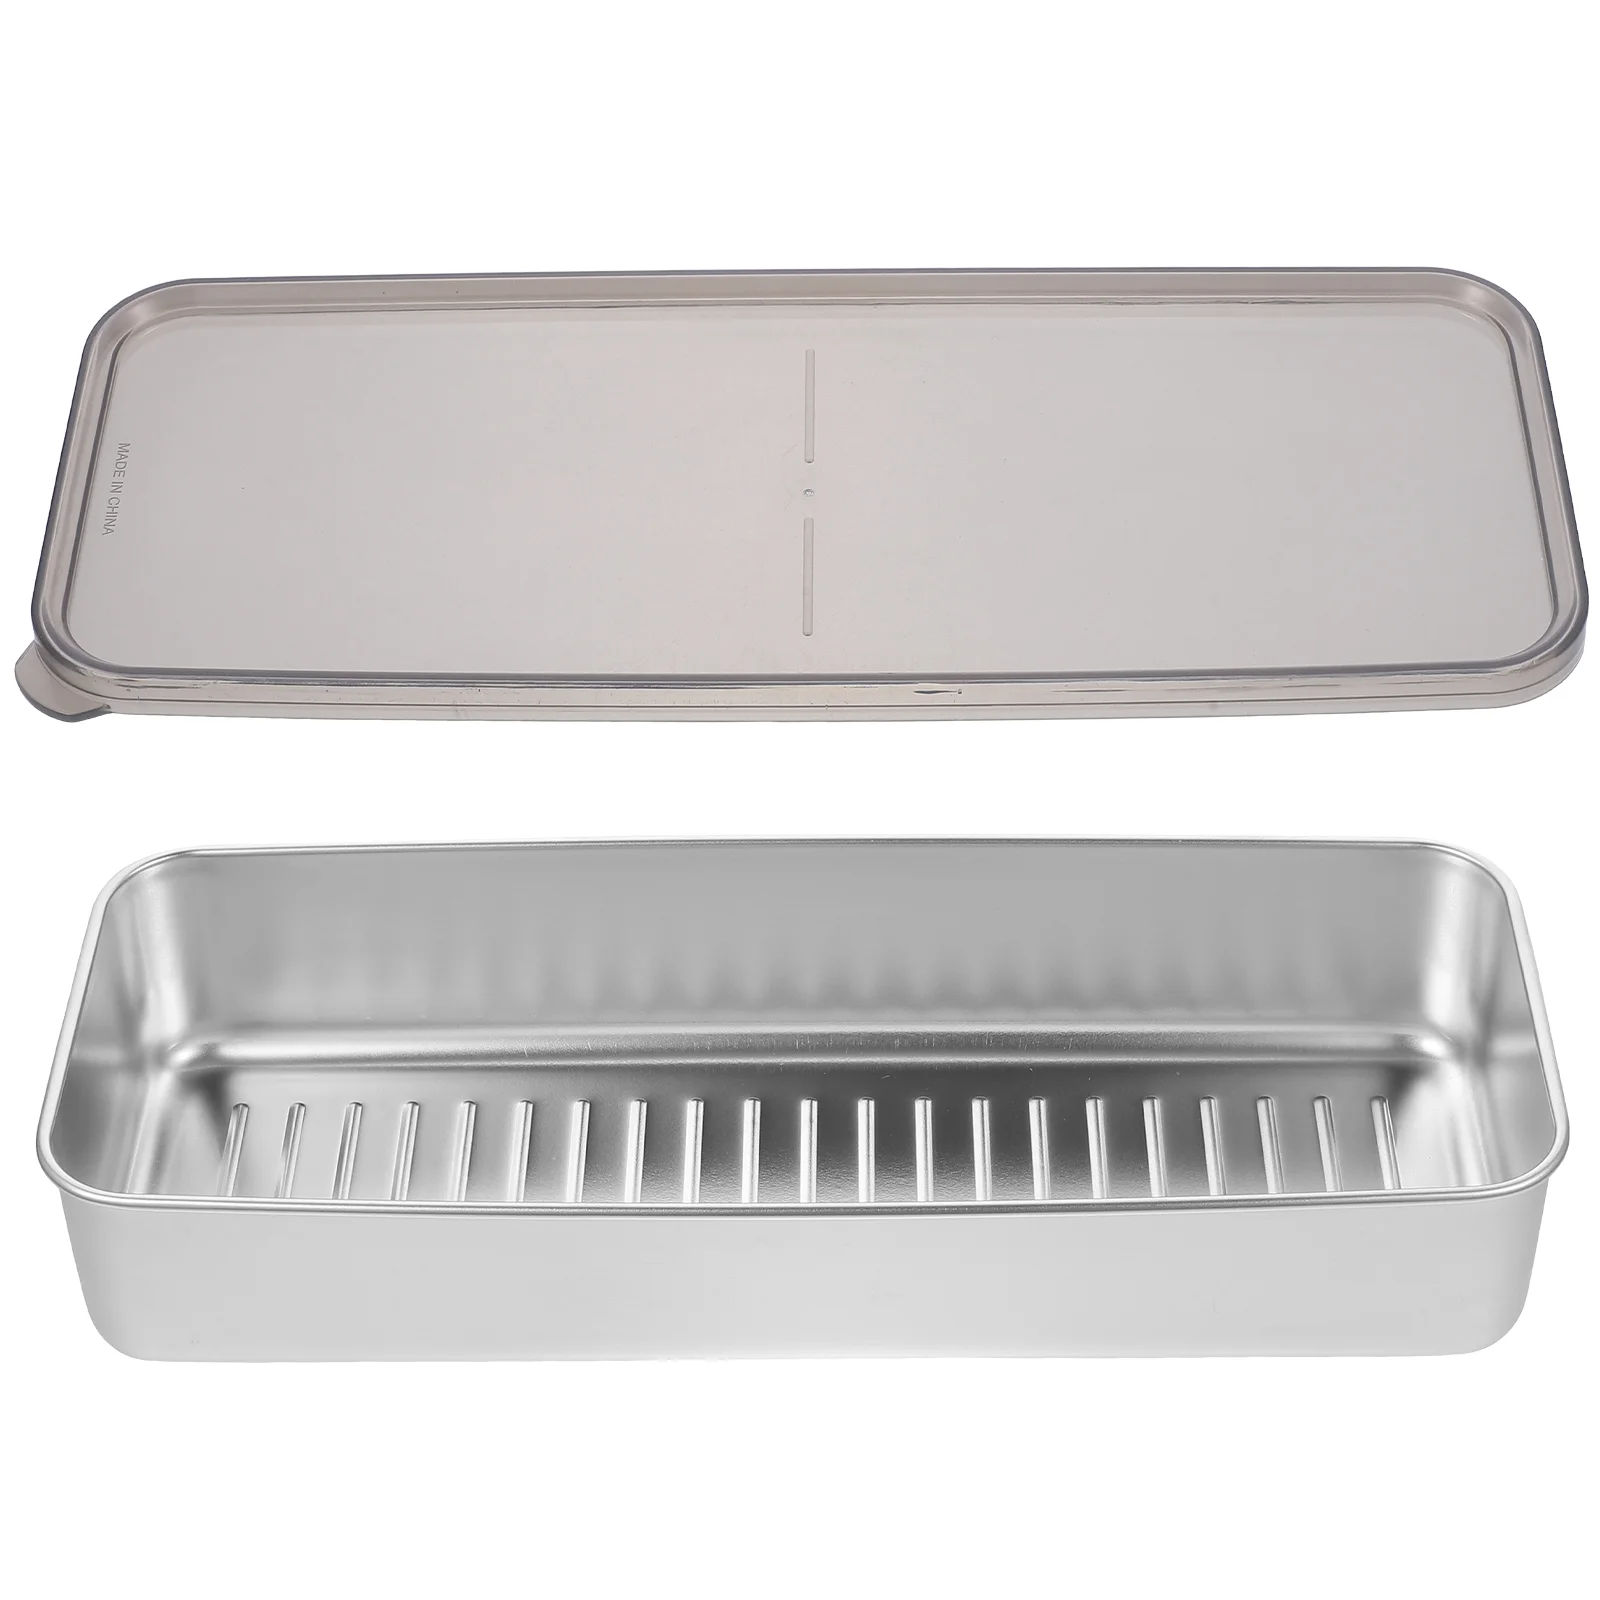 

Stainless Steel Crisper Food Container Bacon Keeper Saver Storage Containers For Fridge Refrigerator Meat